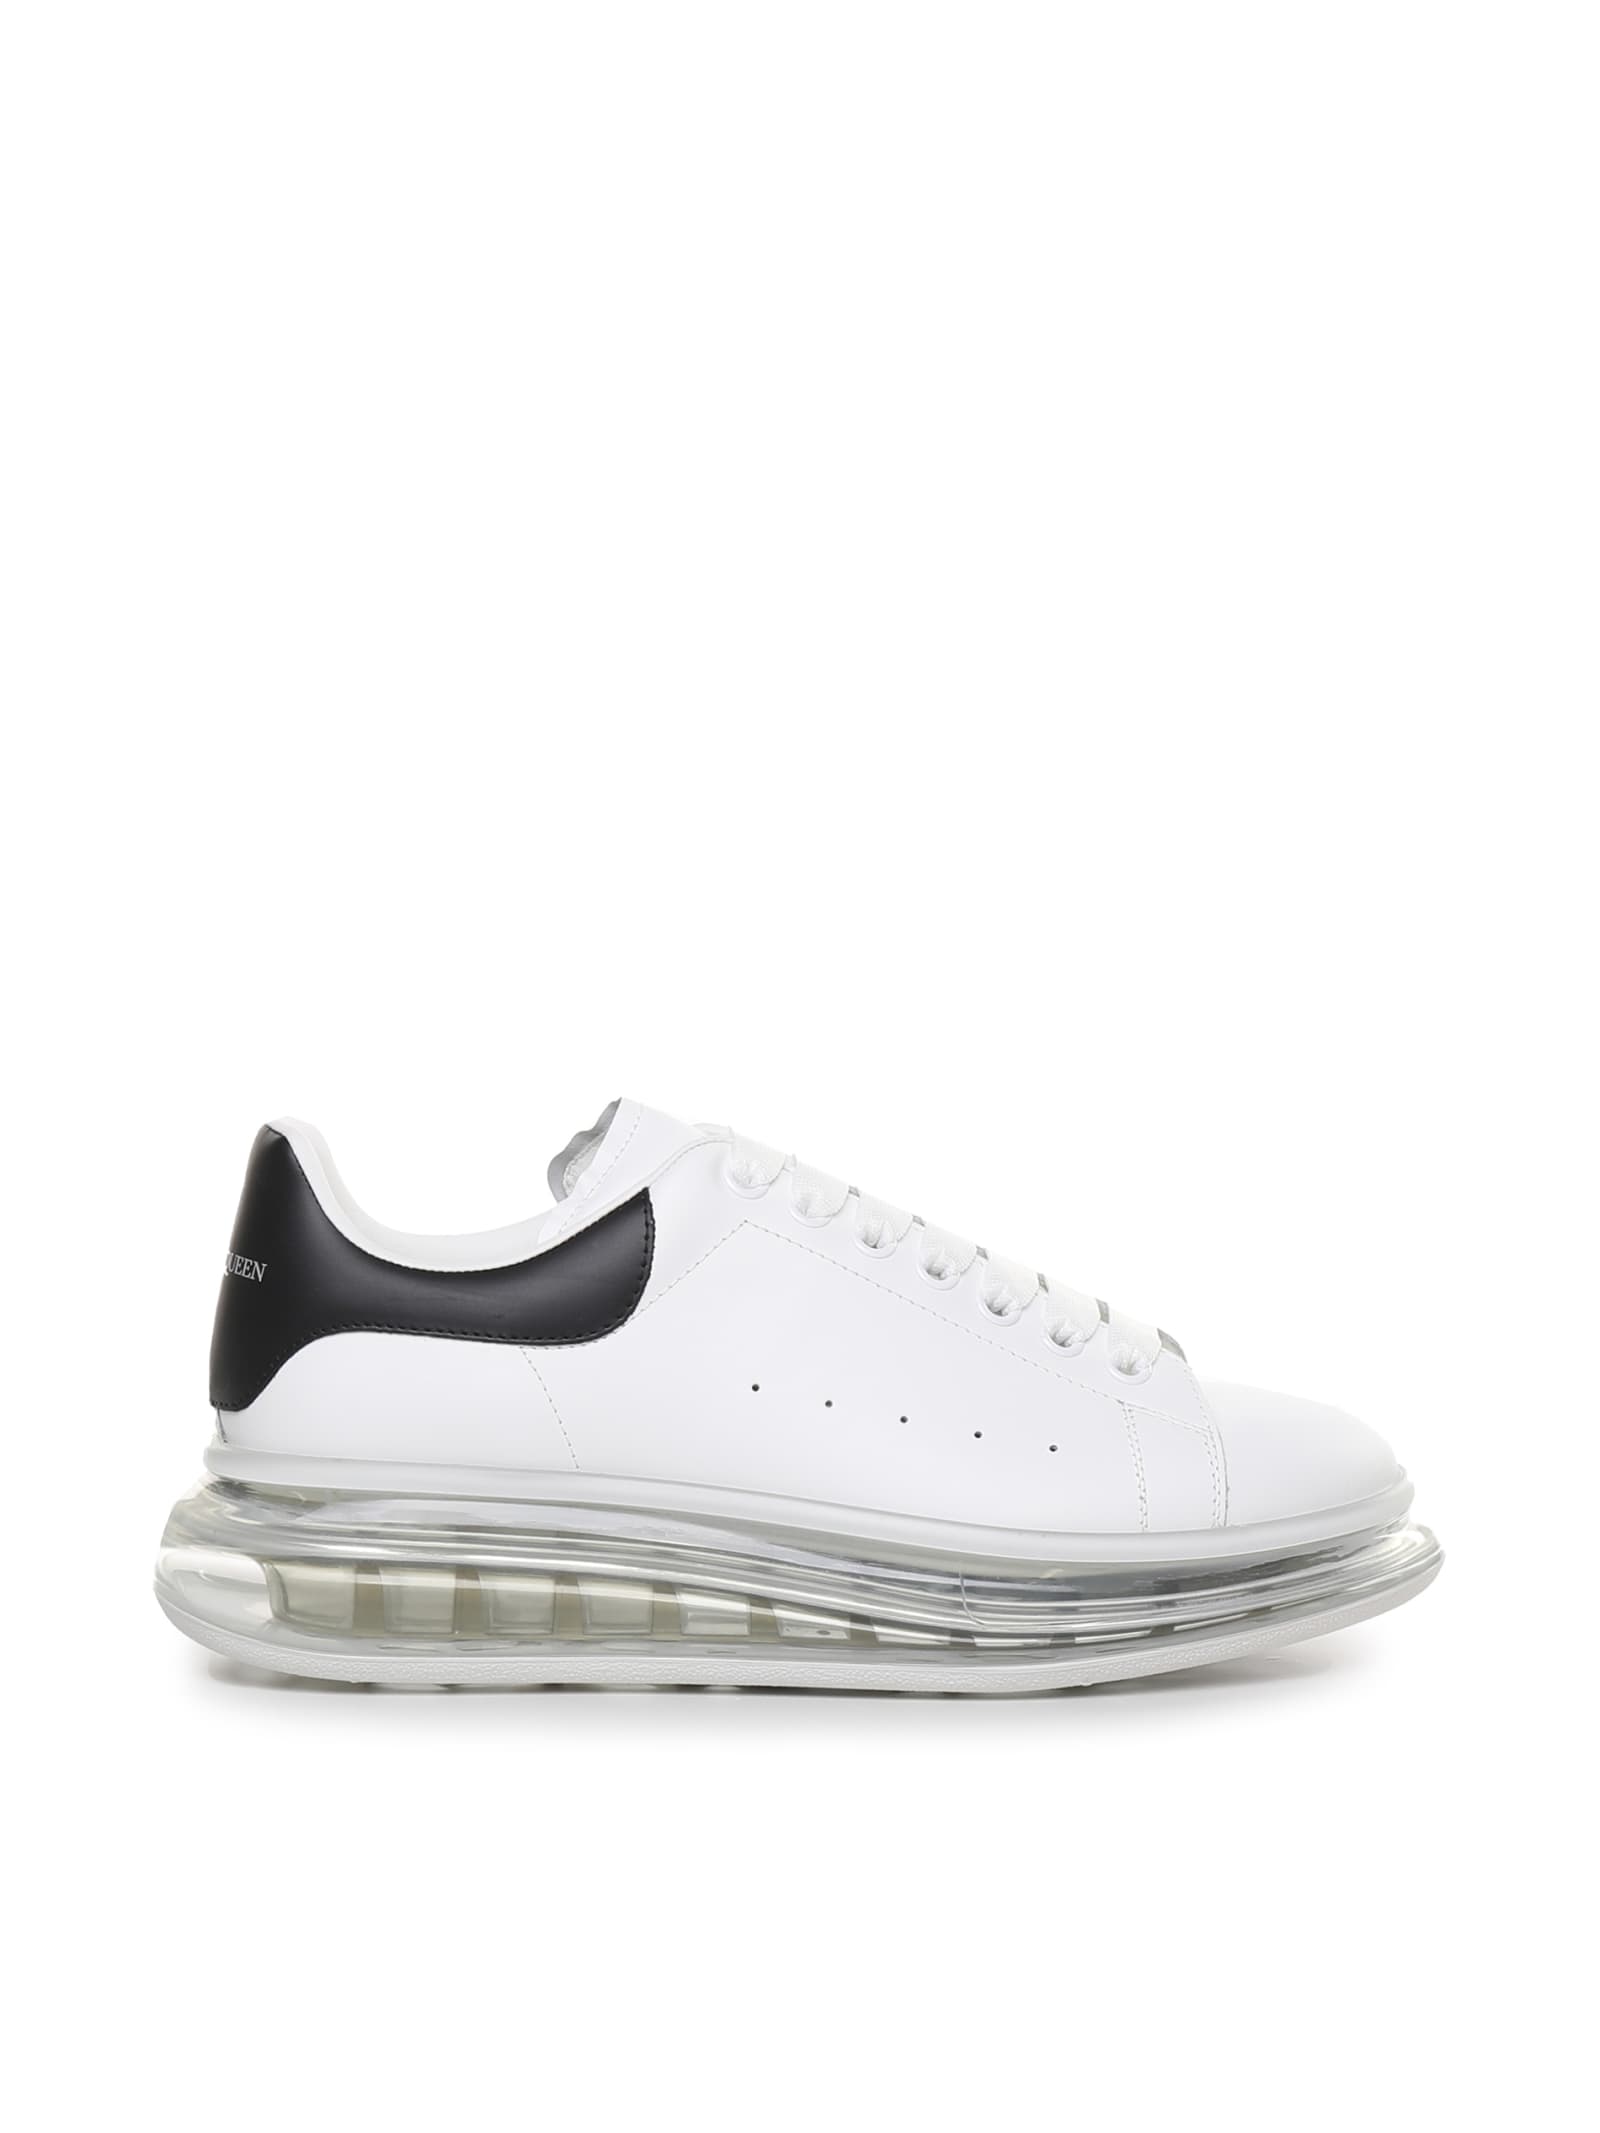 Alexander Mcqueen Oversized Sneakers In Leather With Contrasting Inserts In White/black/white